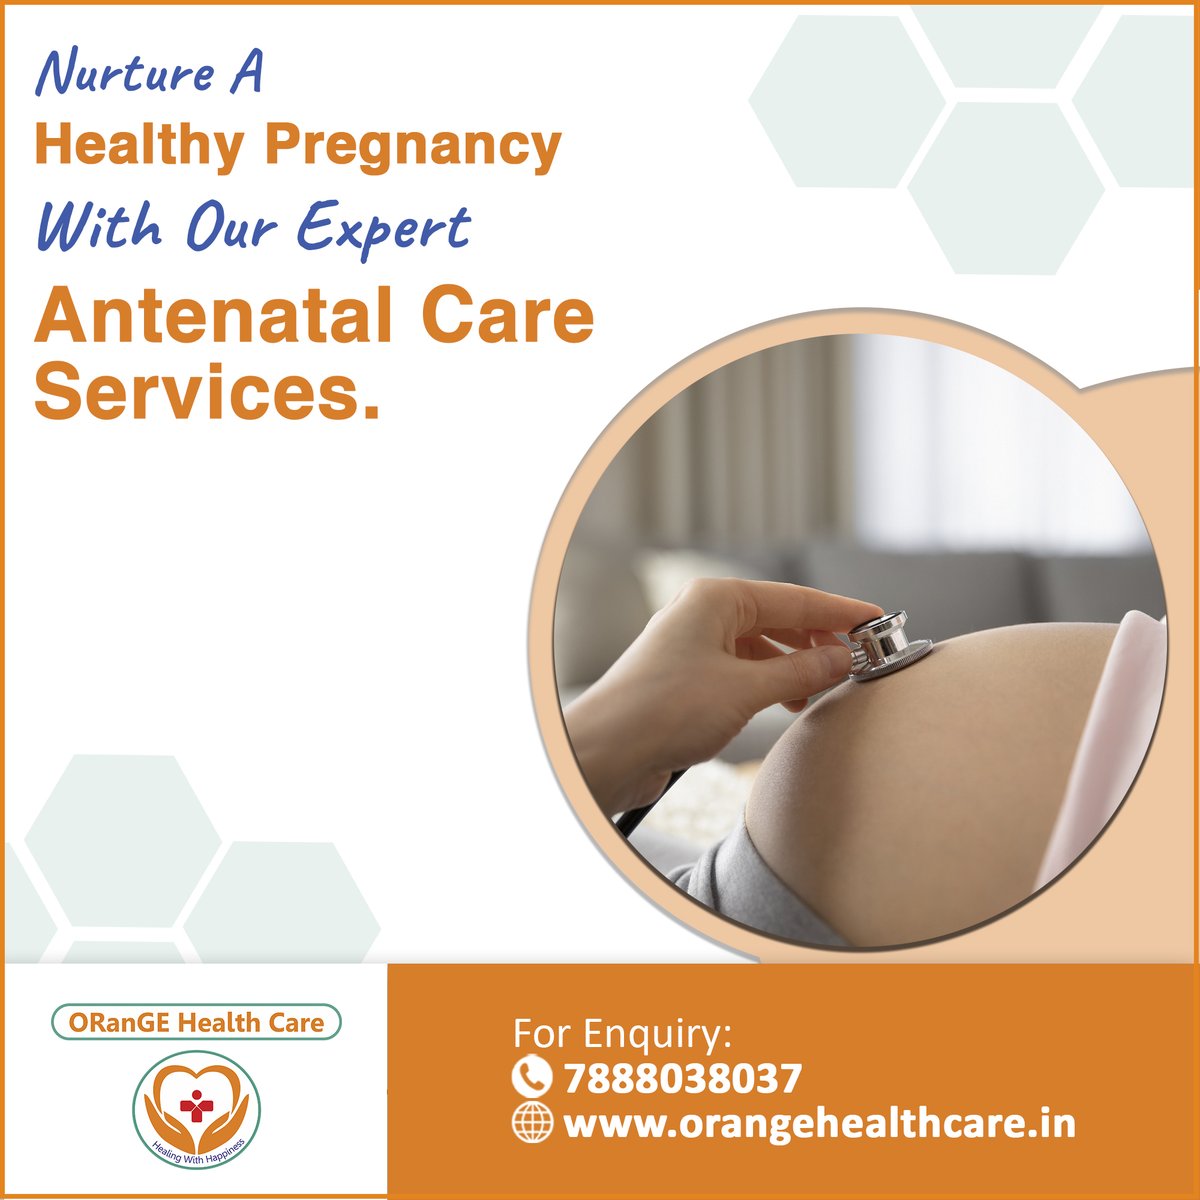 Put   your baby's well-being first with our comprehensive antenatal care programs.

 📌gynecologistwakad.in
📲9503214372
 ✉ info@orangehealthcare.in
 📍 goo.gl/maps/tMz9Yvts7…
    
#BabyWellbeing #AntenatalCare #PrenatalSupport #NewbornHealth #ParentingPrep #Orangehealthcare